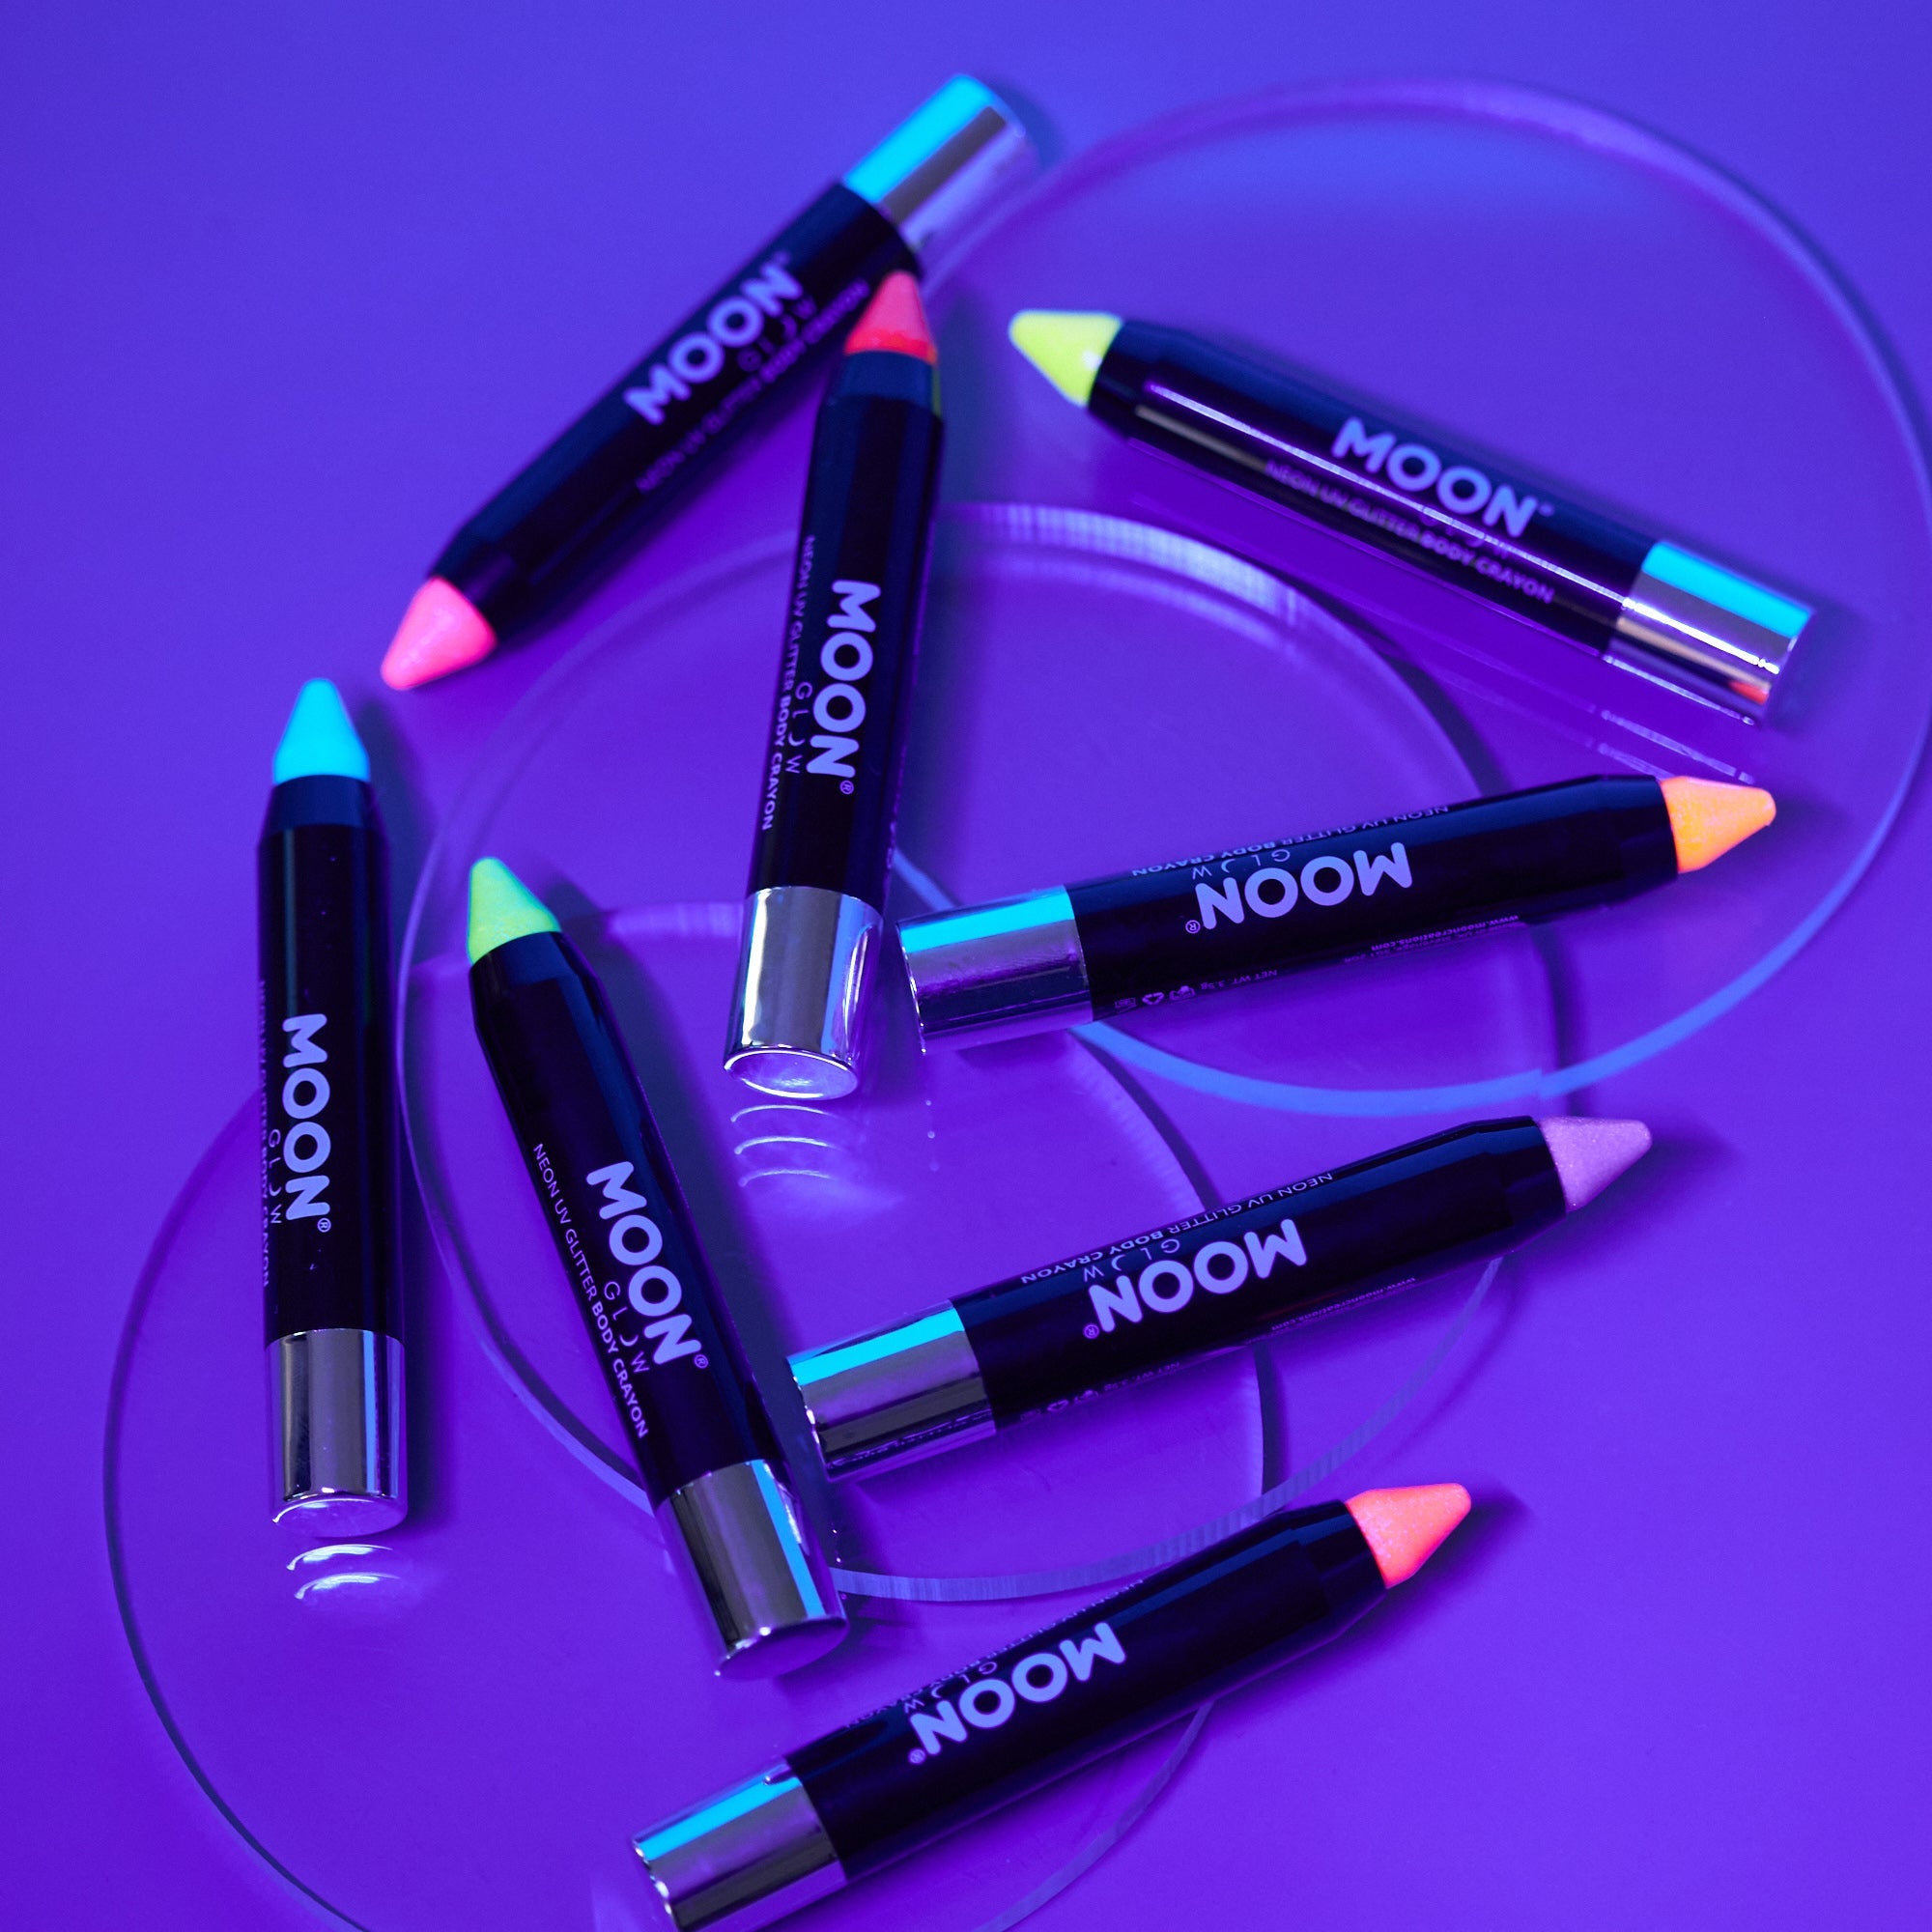 Neon UV Glow Blacklight Glitter Face & Body Crayons. Cosmetically certified, FDA & Health Canada compliant and cruelty free.